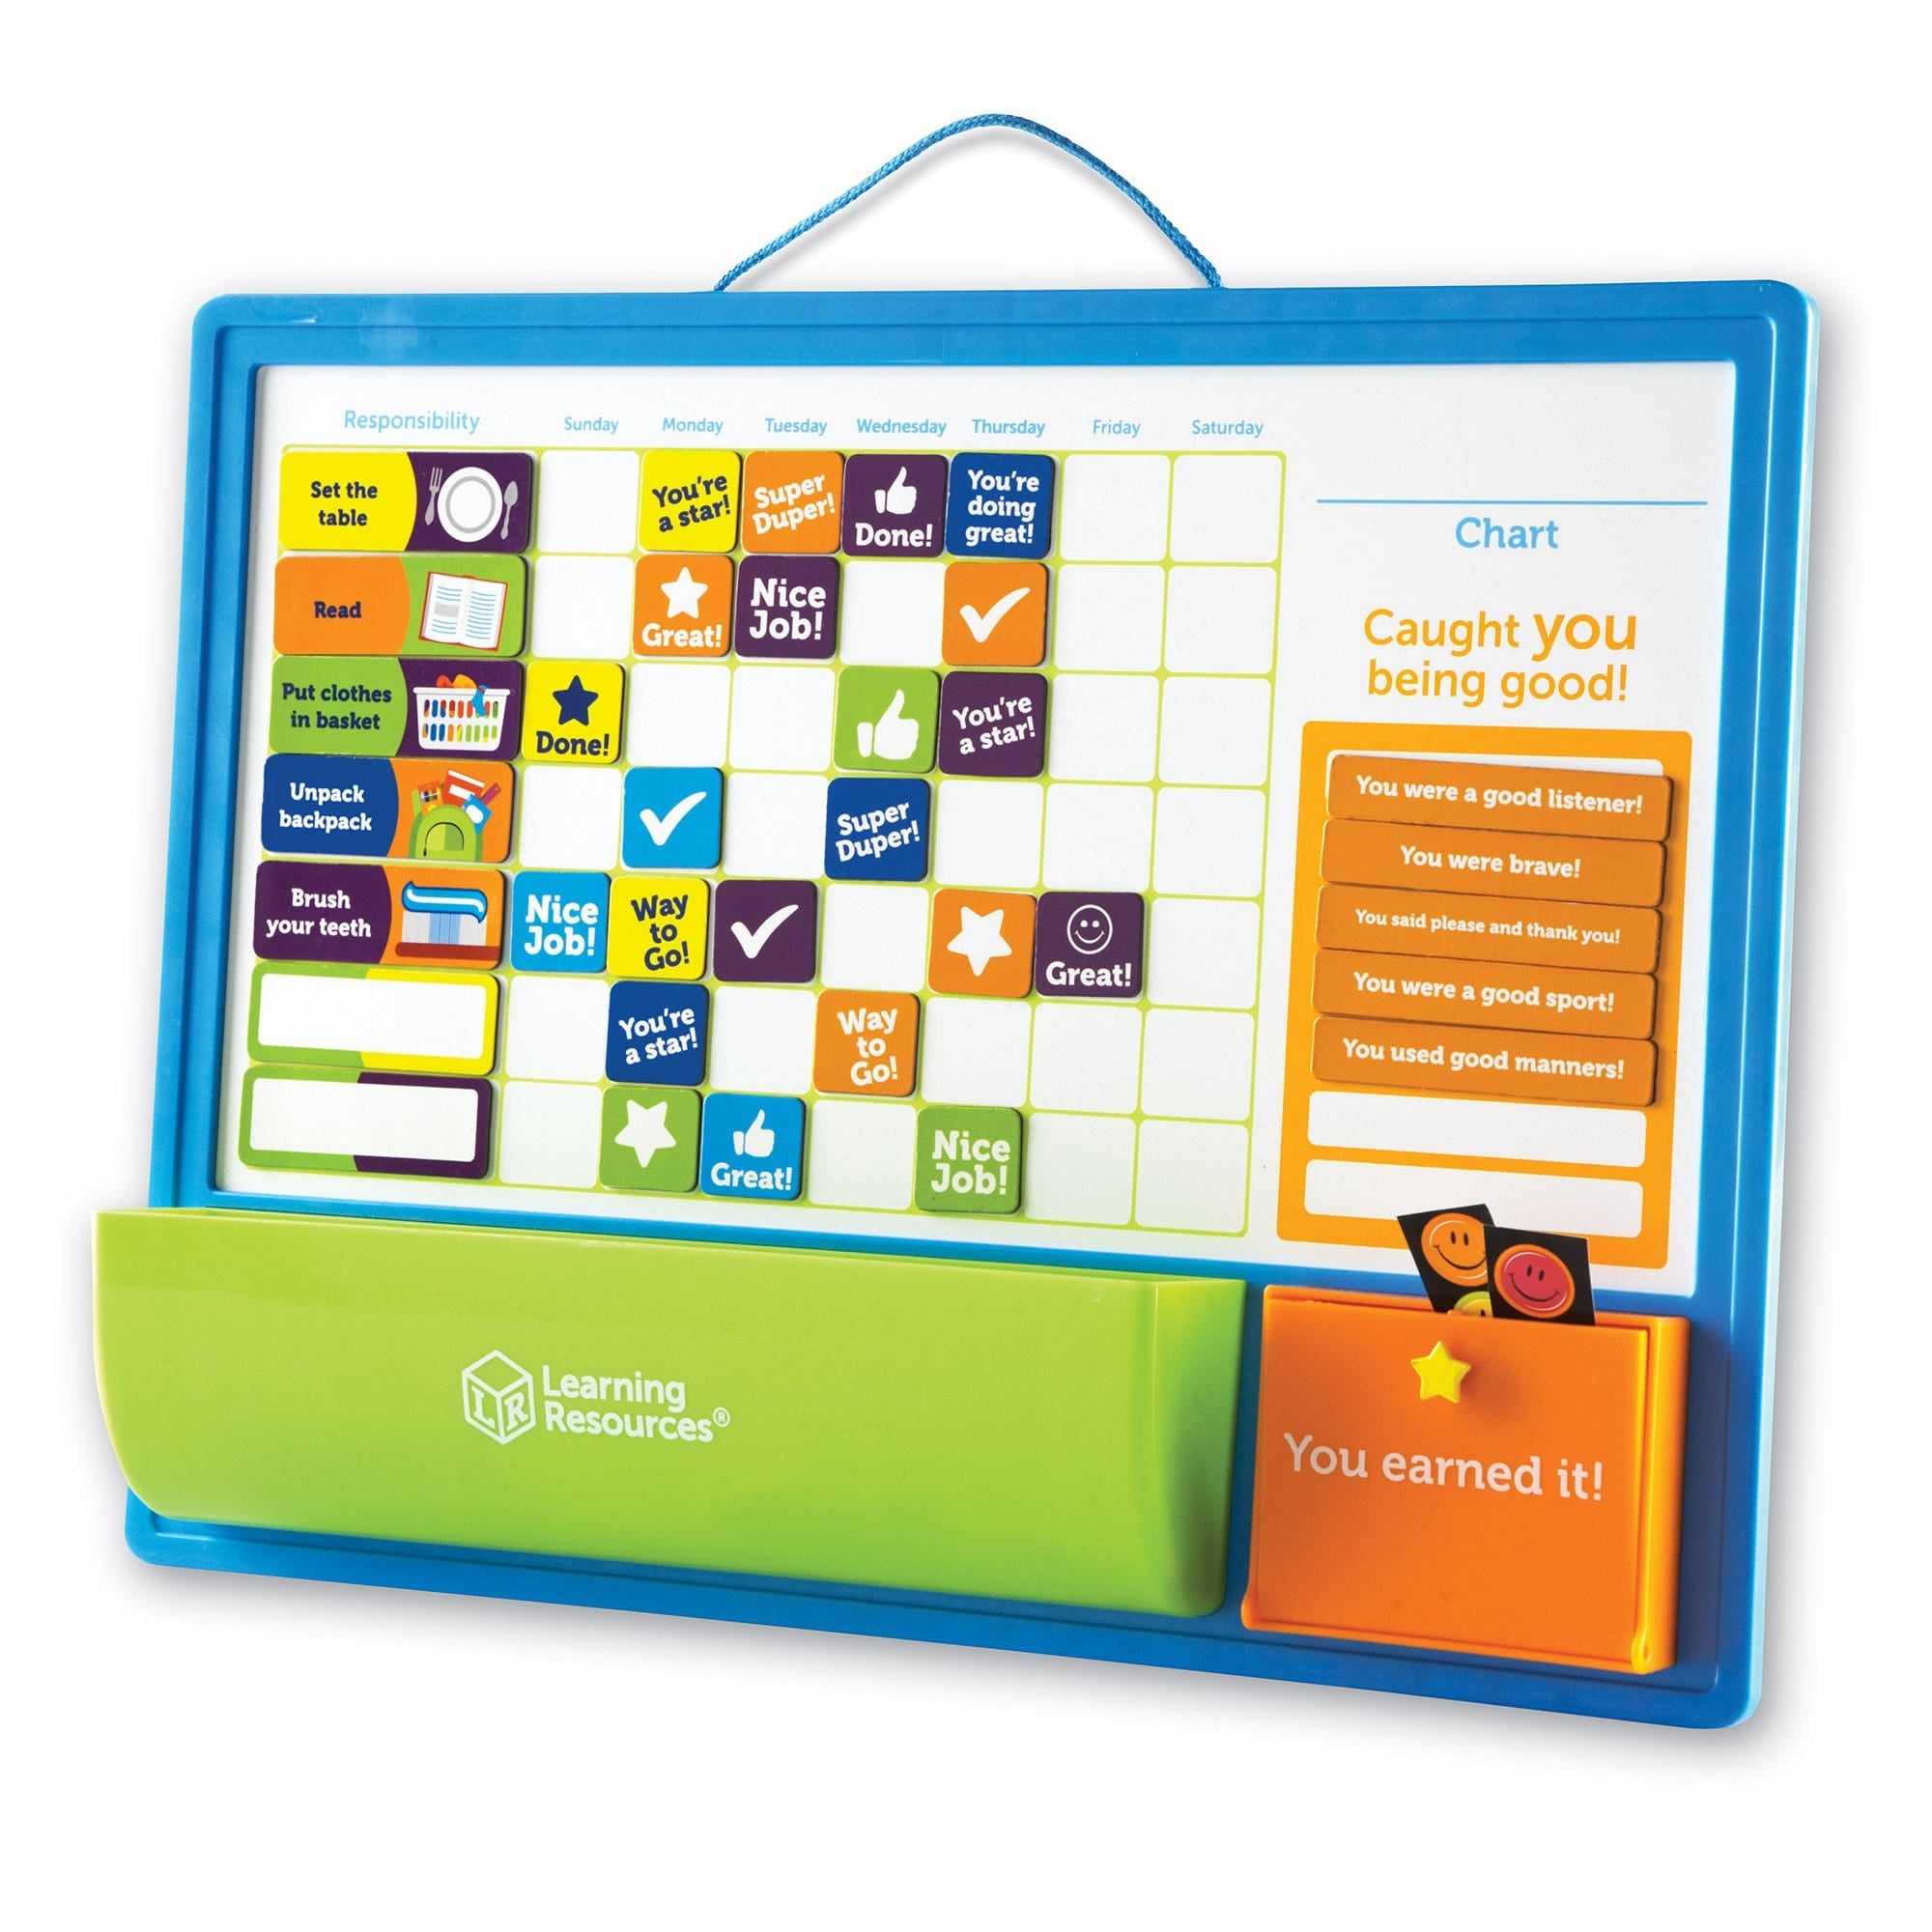 Good Job Reward Chart, The Good Job Reward Chart offers an innovative way to instill good habits and social skills in young children. Designed to be both educational and entertaining, this reward chart is an invaluable resource for parents looking to engage their kids in household chores and other important activities. Features of the Good Job Reward Chart: Customization: Task Selection: The chart is fully customisable, allowing parents to select chores that are appropriate for their child's age and skill s